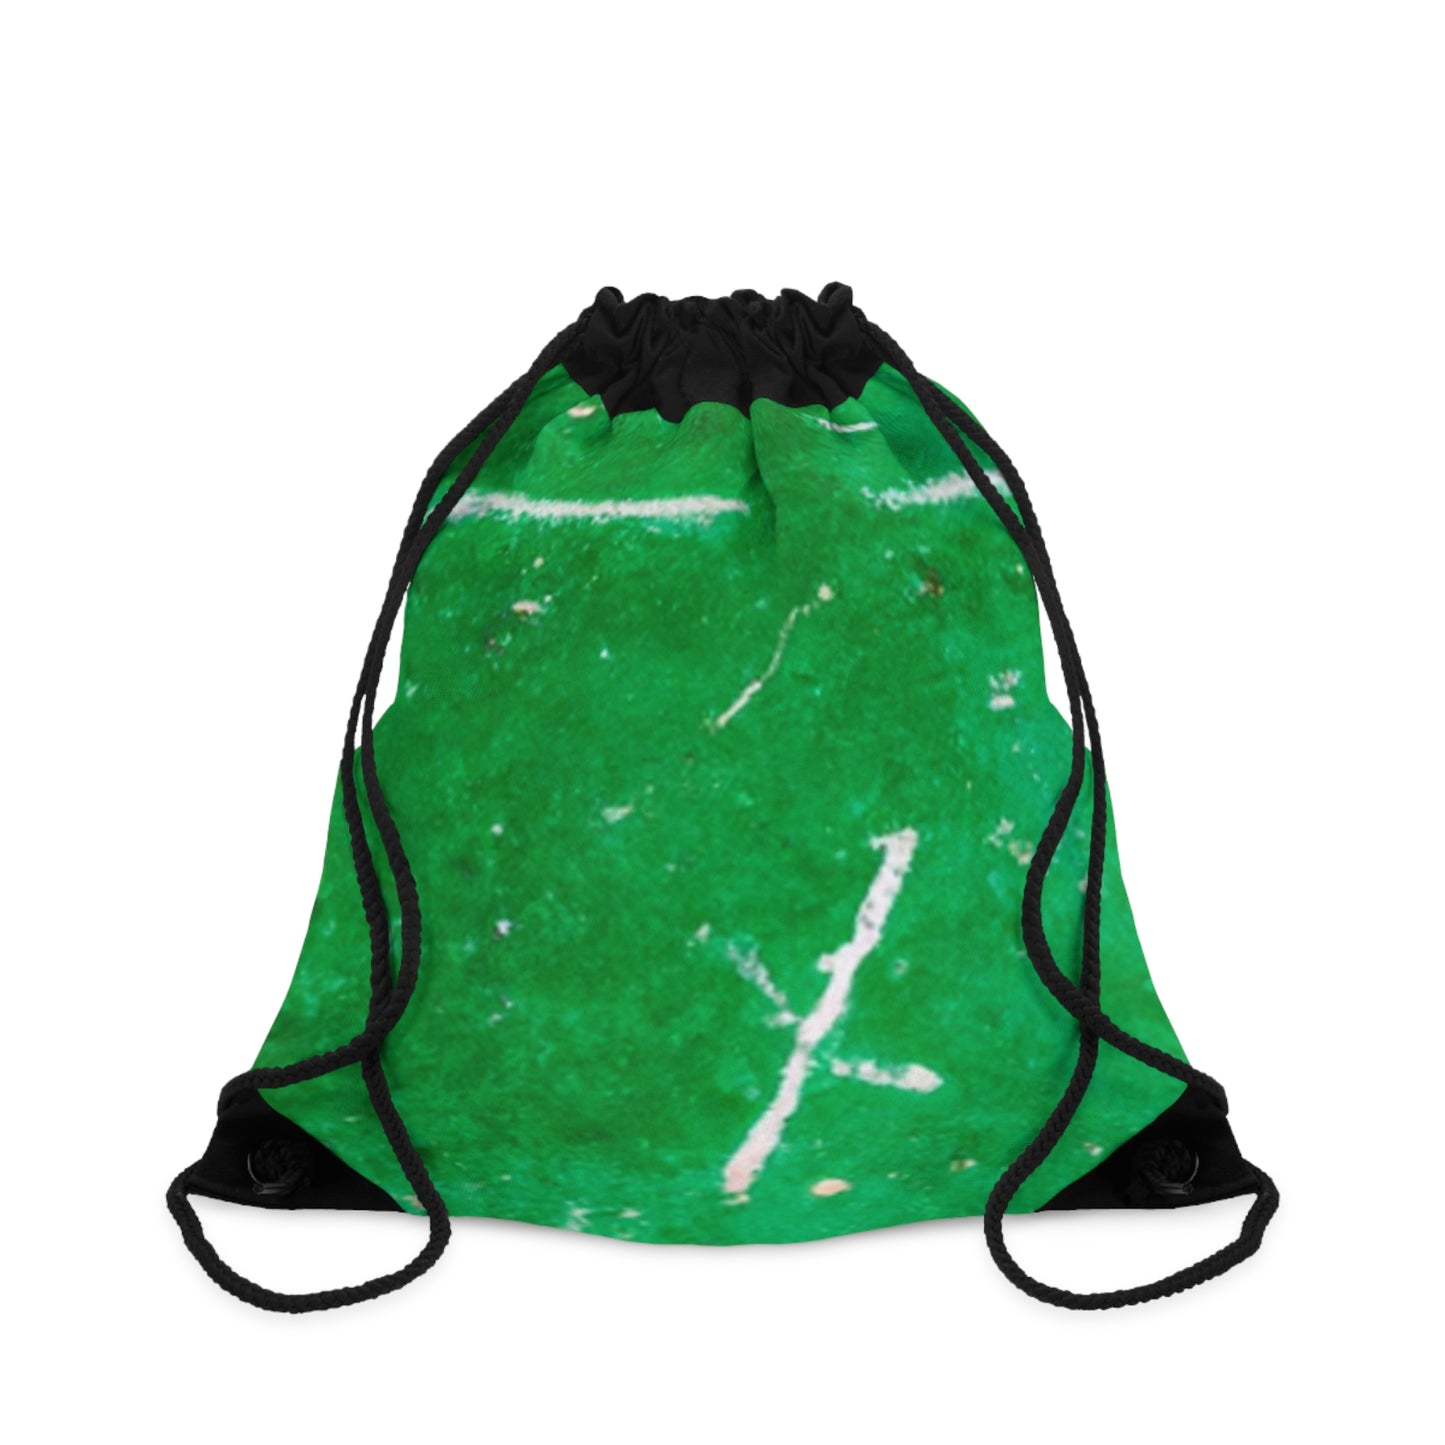 "Dynamic Sporting Spectacle: Capturing the Excitement of Your Favorite Sport!" - Go Plus Drawstring Bag